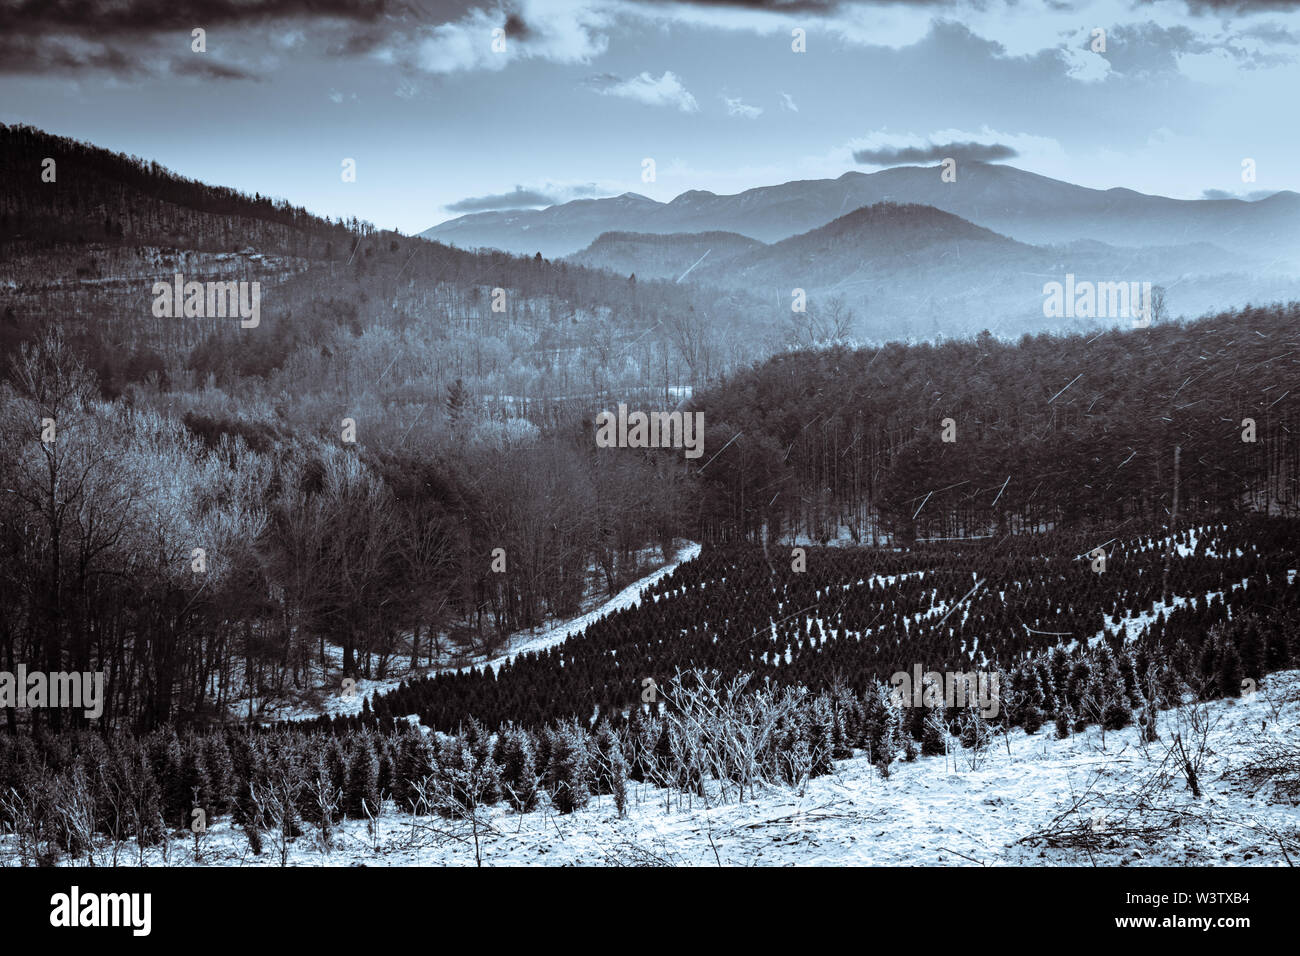 Duotone of a snowy landscape near Penland, North Carolina, with the Black Mountains ridge in the background. Stock Photo